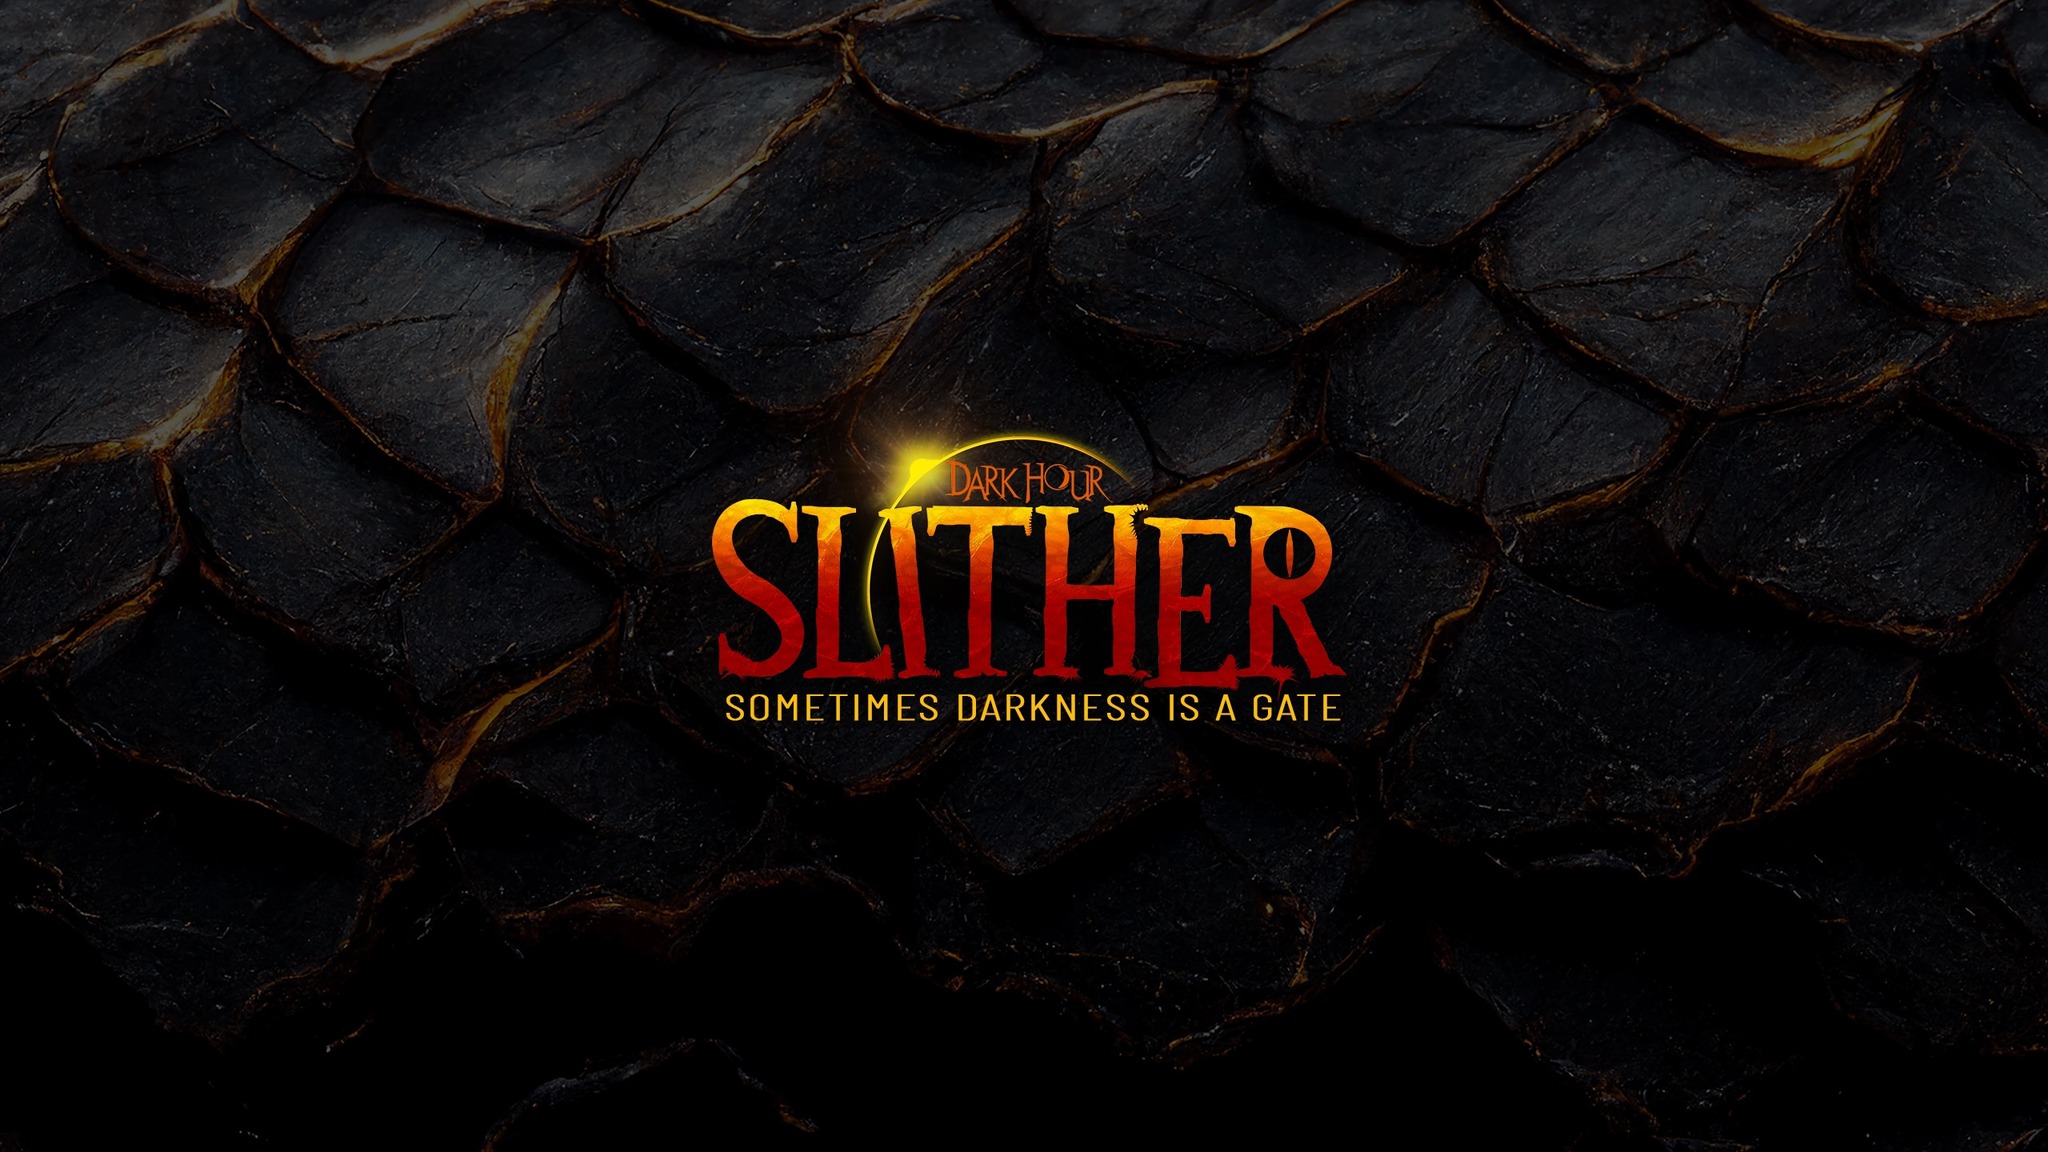 Slither at Dark Hour Haunted House